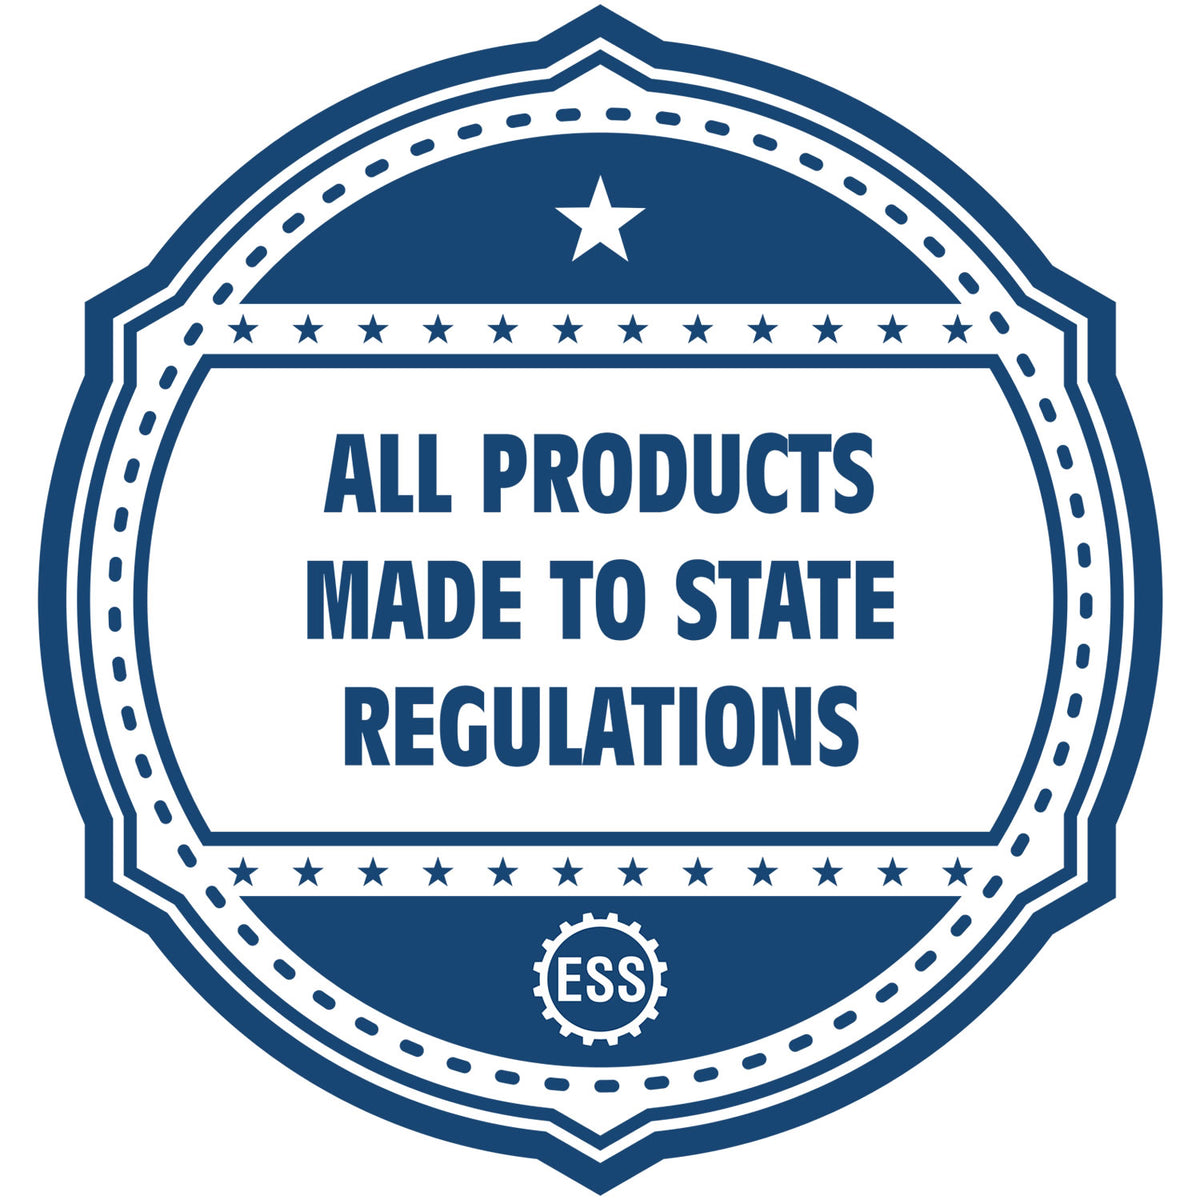 An icon or badge element for the Long Reach Nevada PE Seal showing that this product is made in compliance with state regulations.